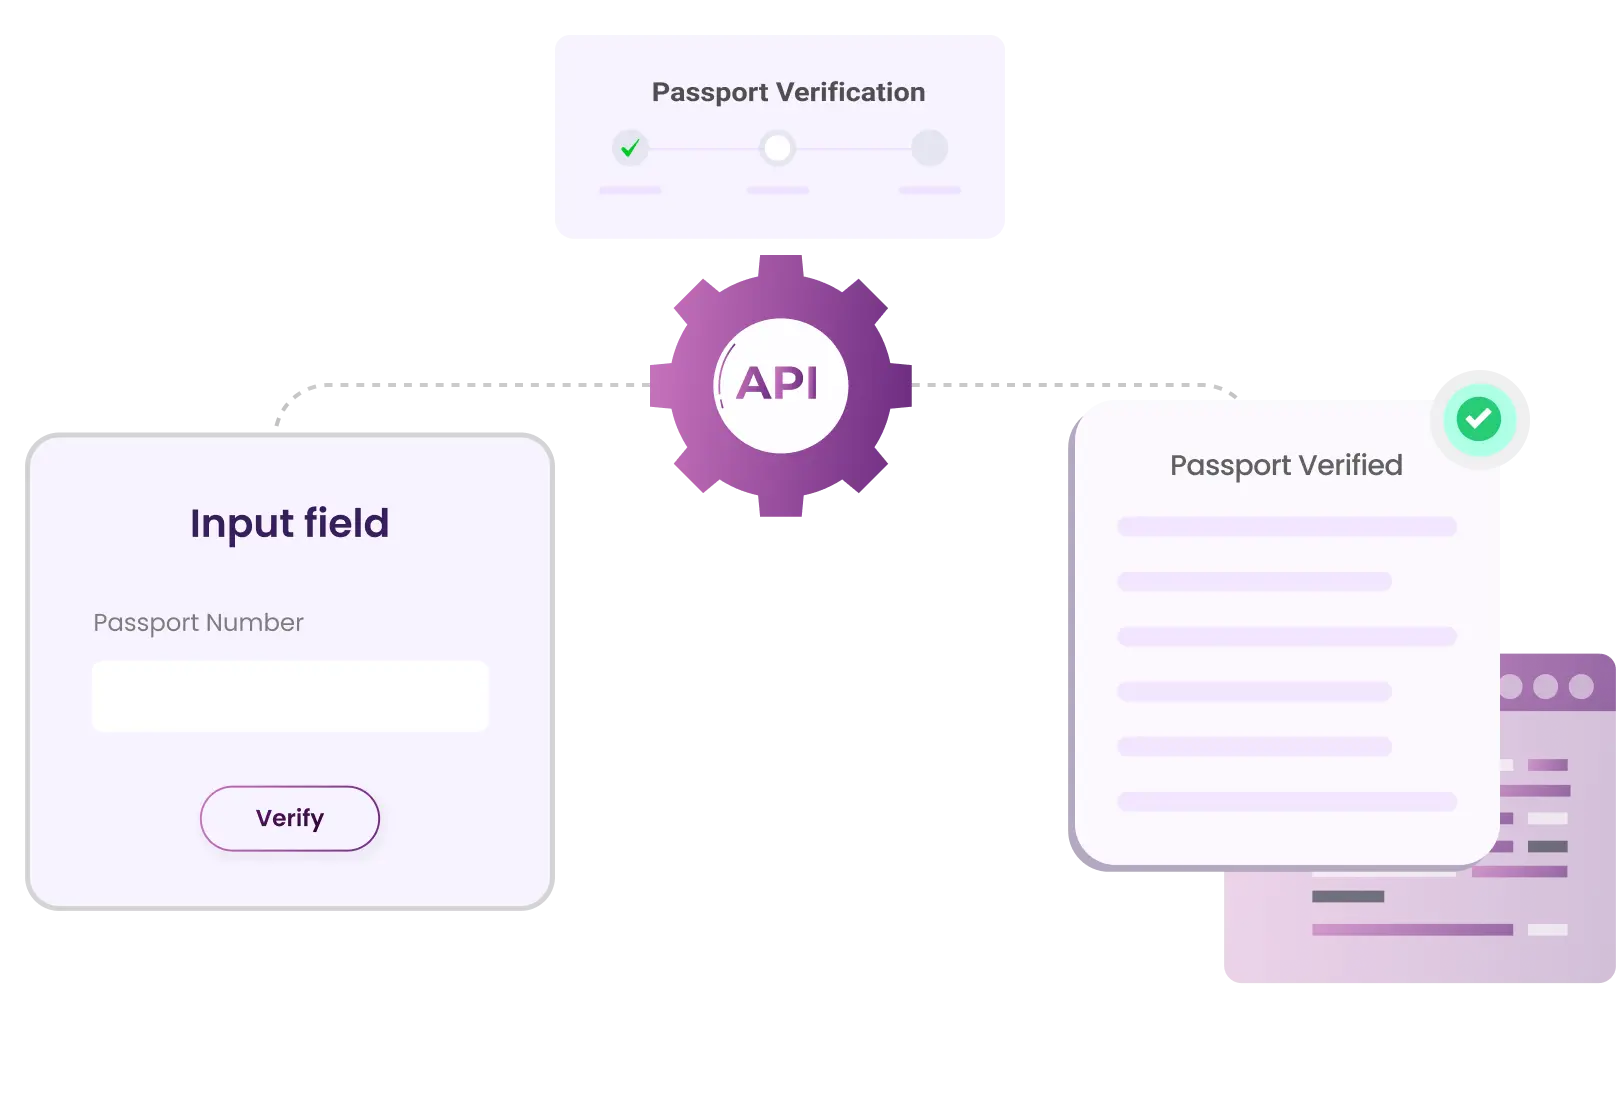 A diagram showing passport verification process via an API. Input field on the left, API in the center, and a "Passport Verified" confirmation on the right.